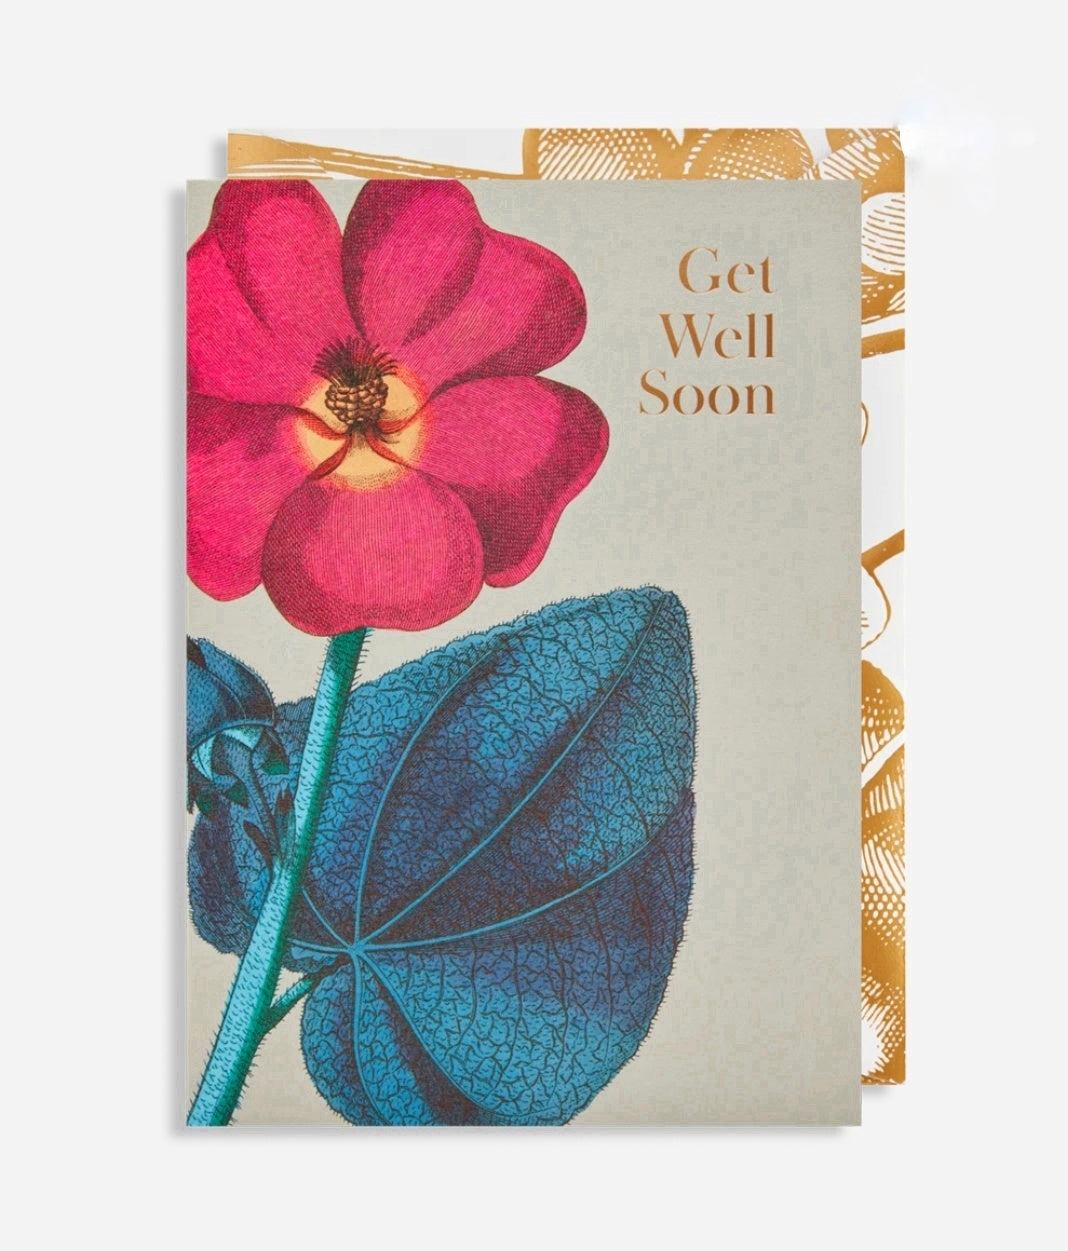 Get Well Soon Card with Kew Garden Inspired Flower Illustration